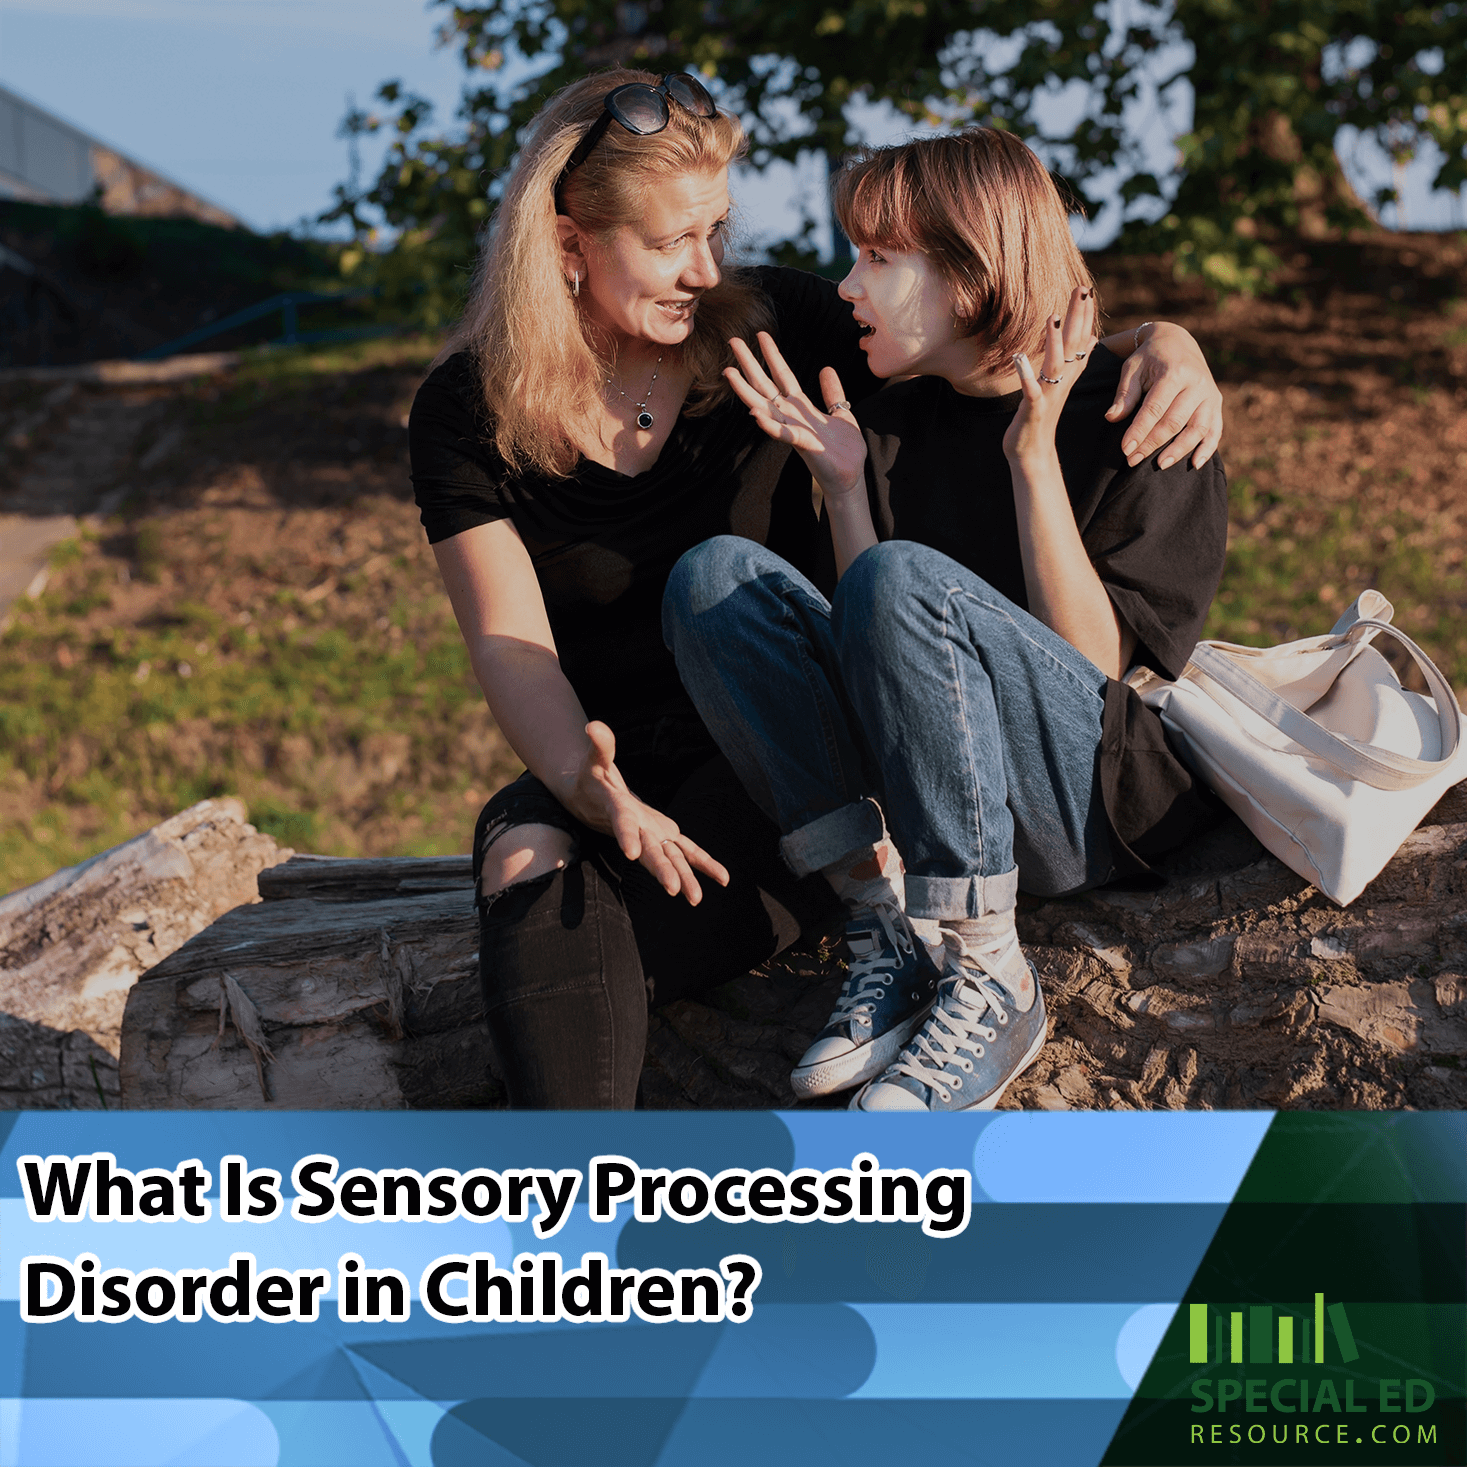 Mother supporting her daughter in conversation outside, showcasing understanding in dealing with Sensory Processing Disorder in Children.